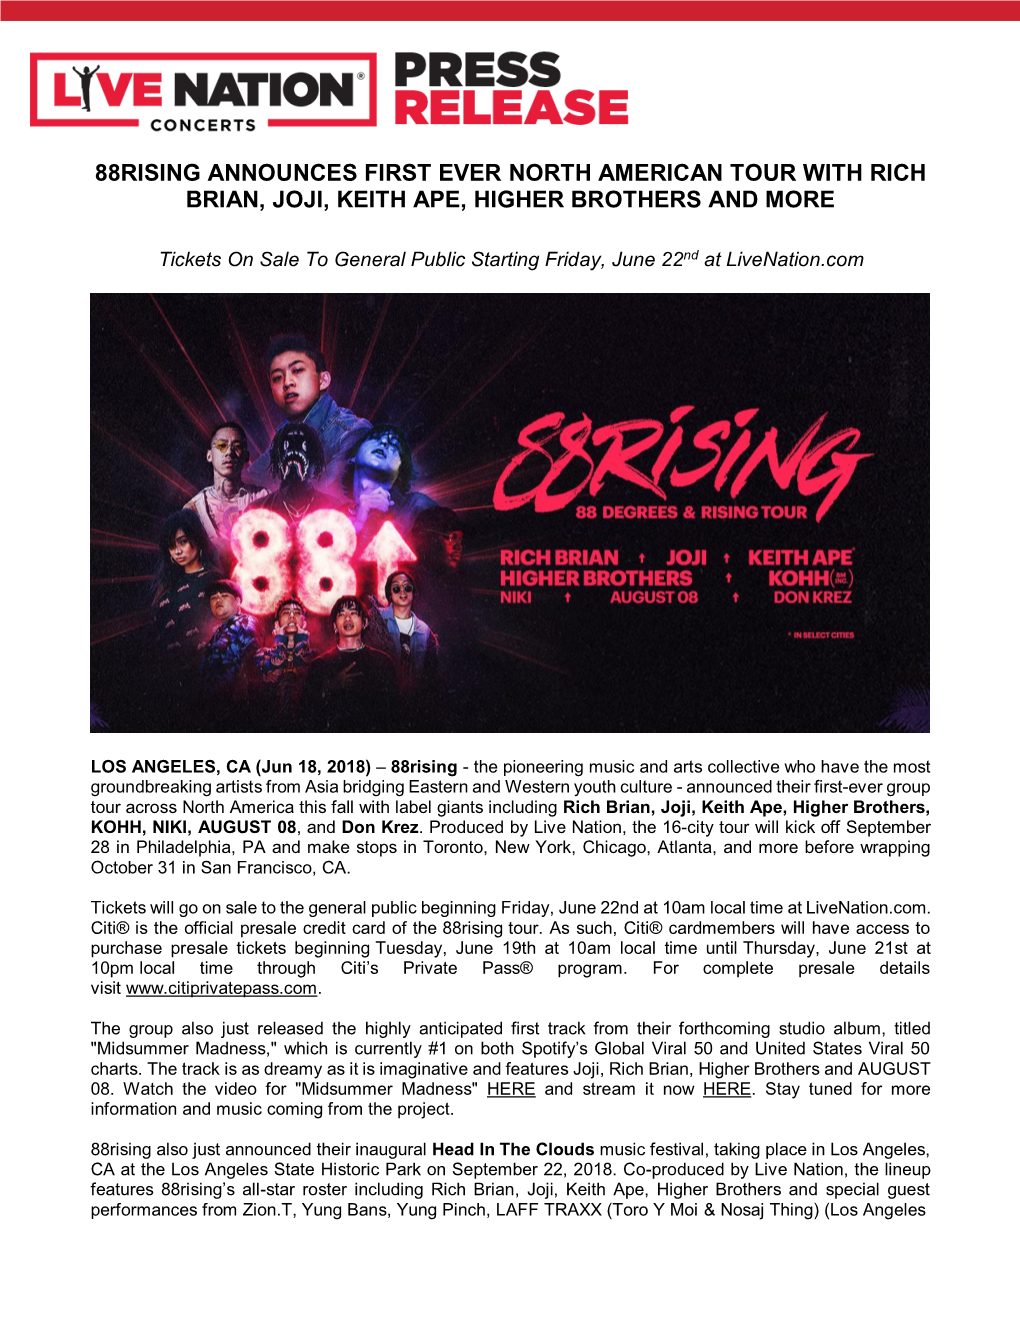 88Rising Announces First Ever North American Tour with Rich Brian, Joji, Keith Ape, Higher Brothers and More